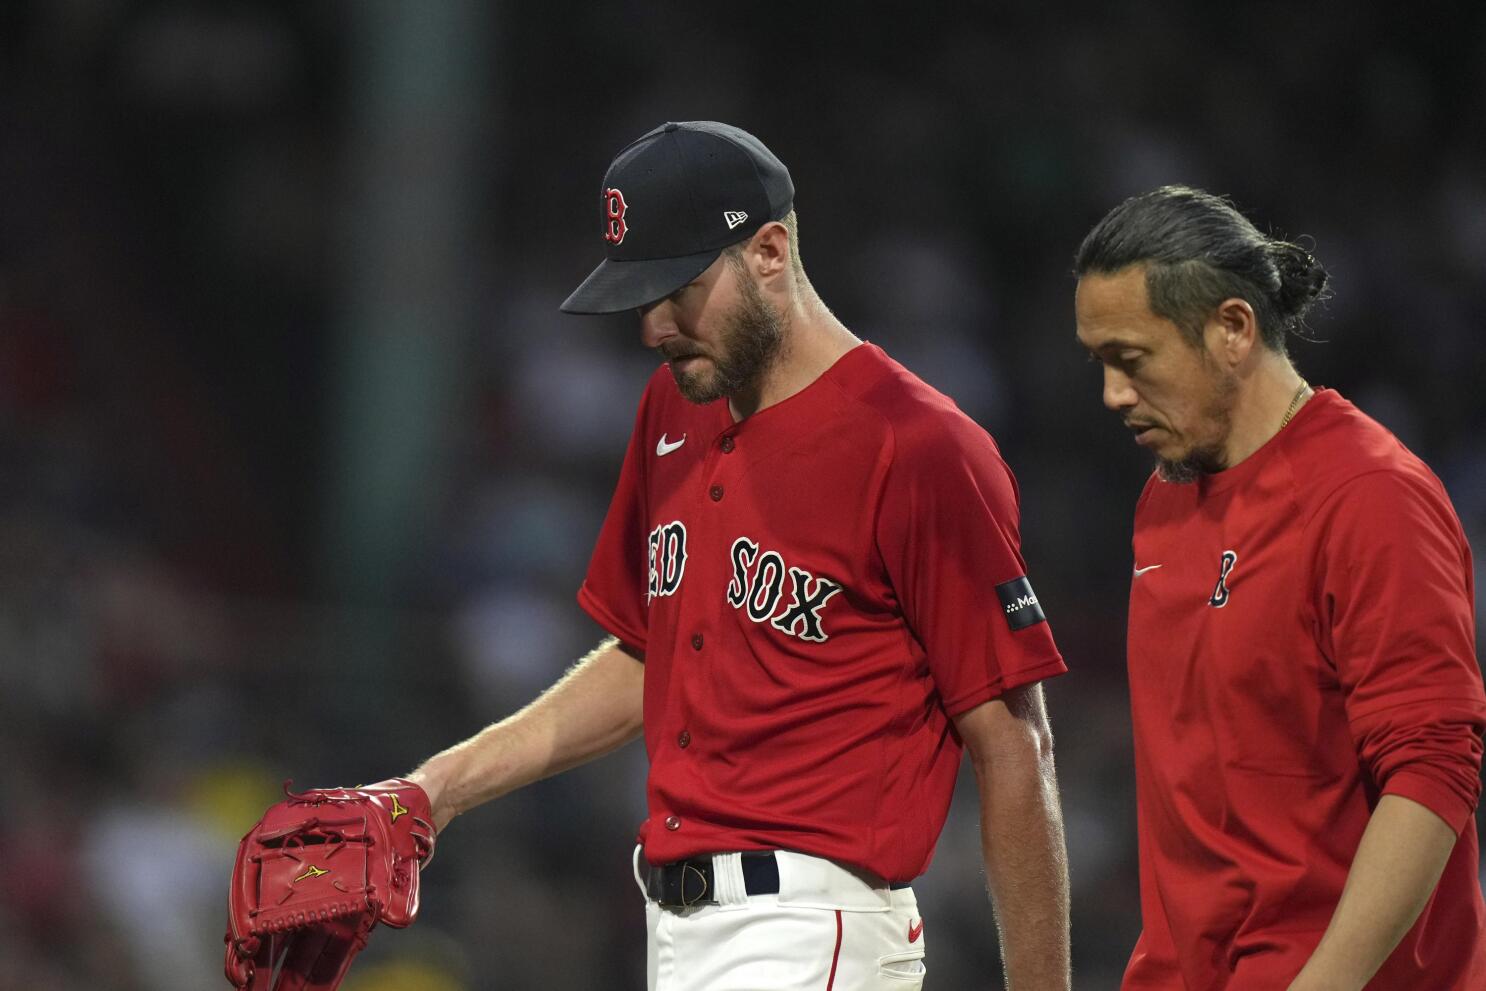 The Cutting Edge: Chris Sale Fallout Continues